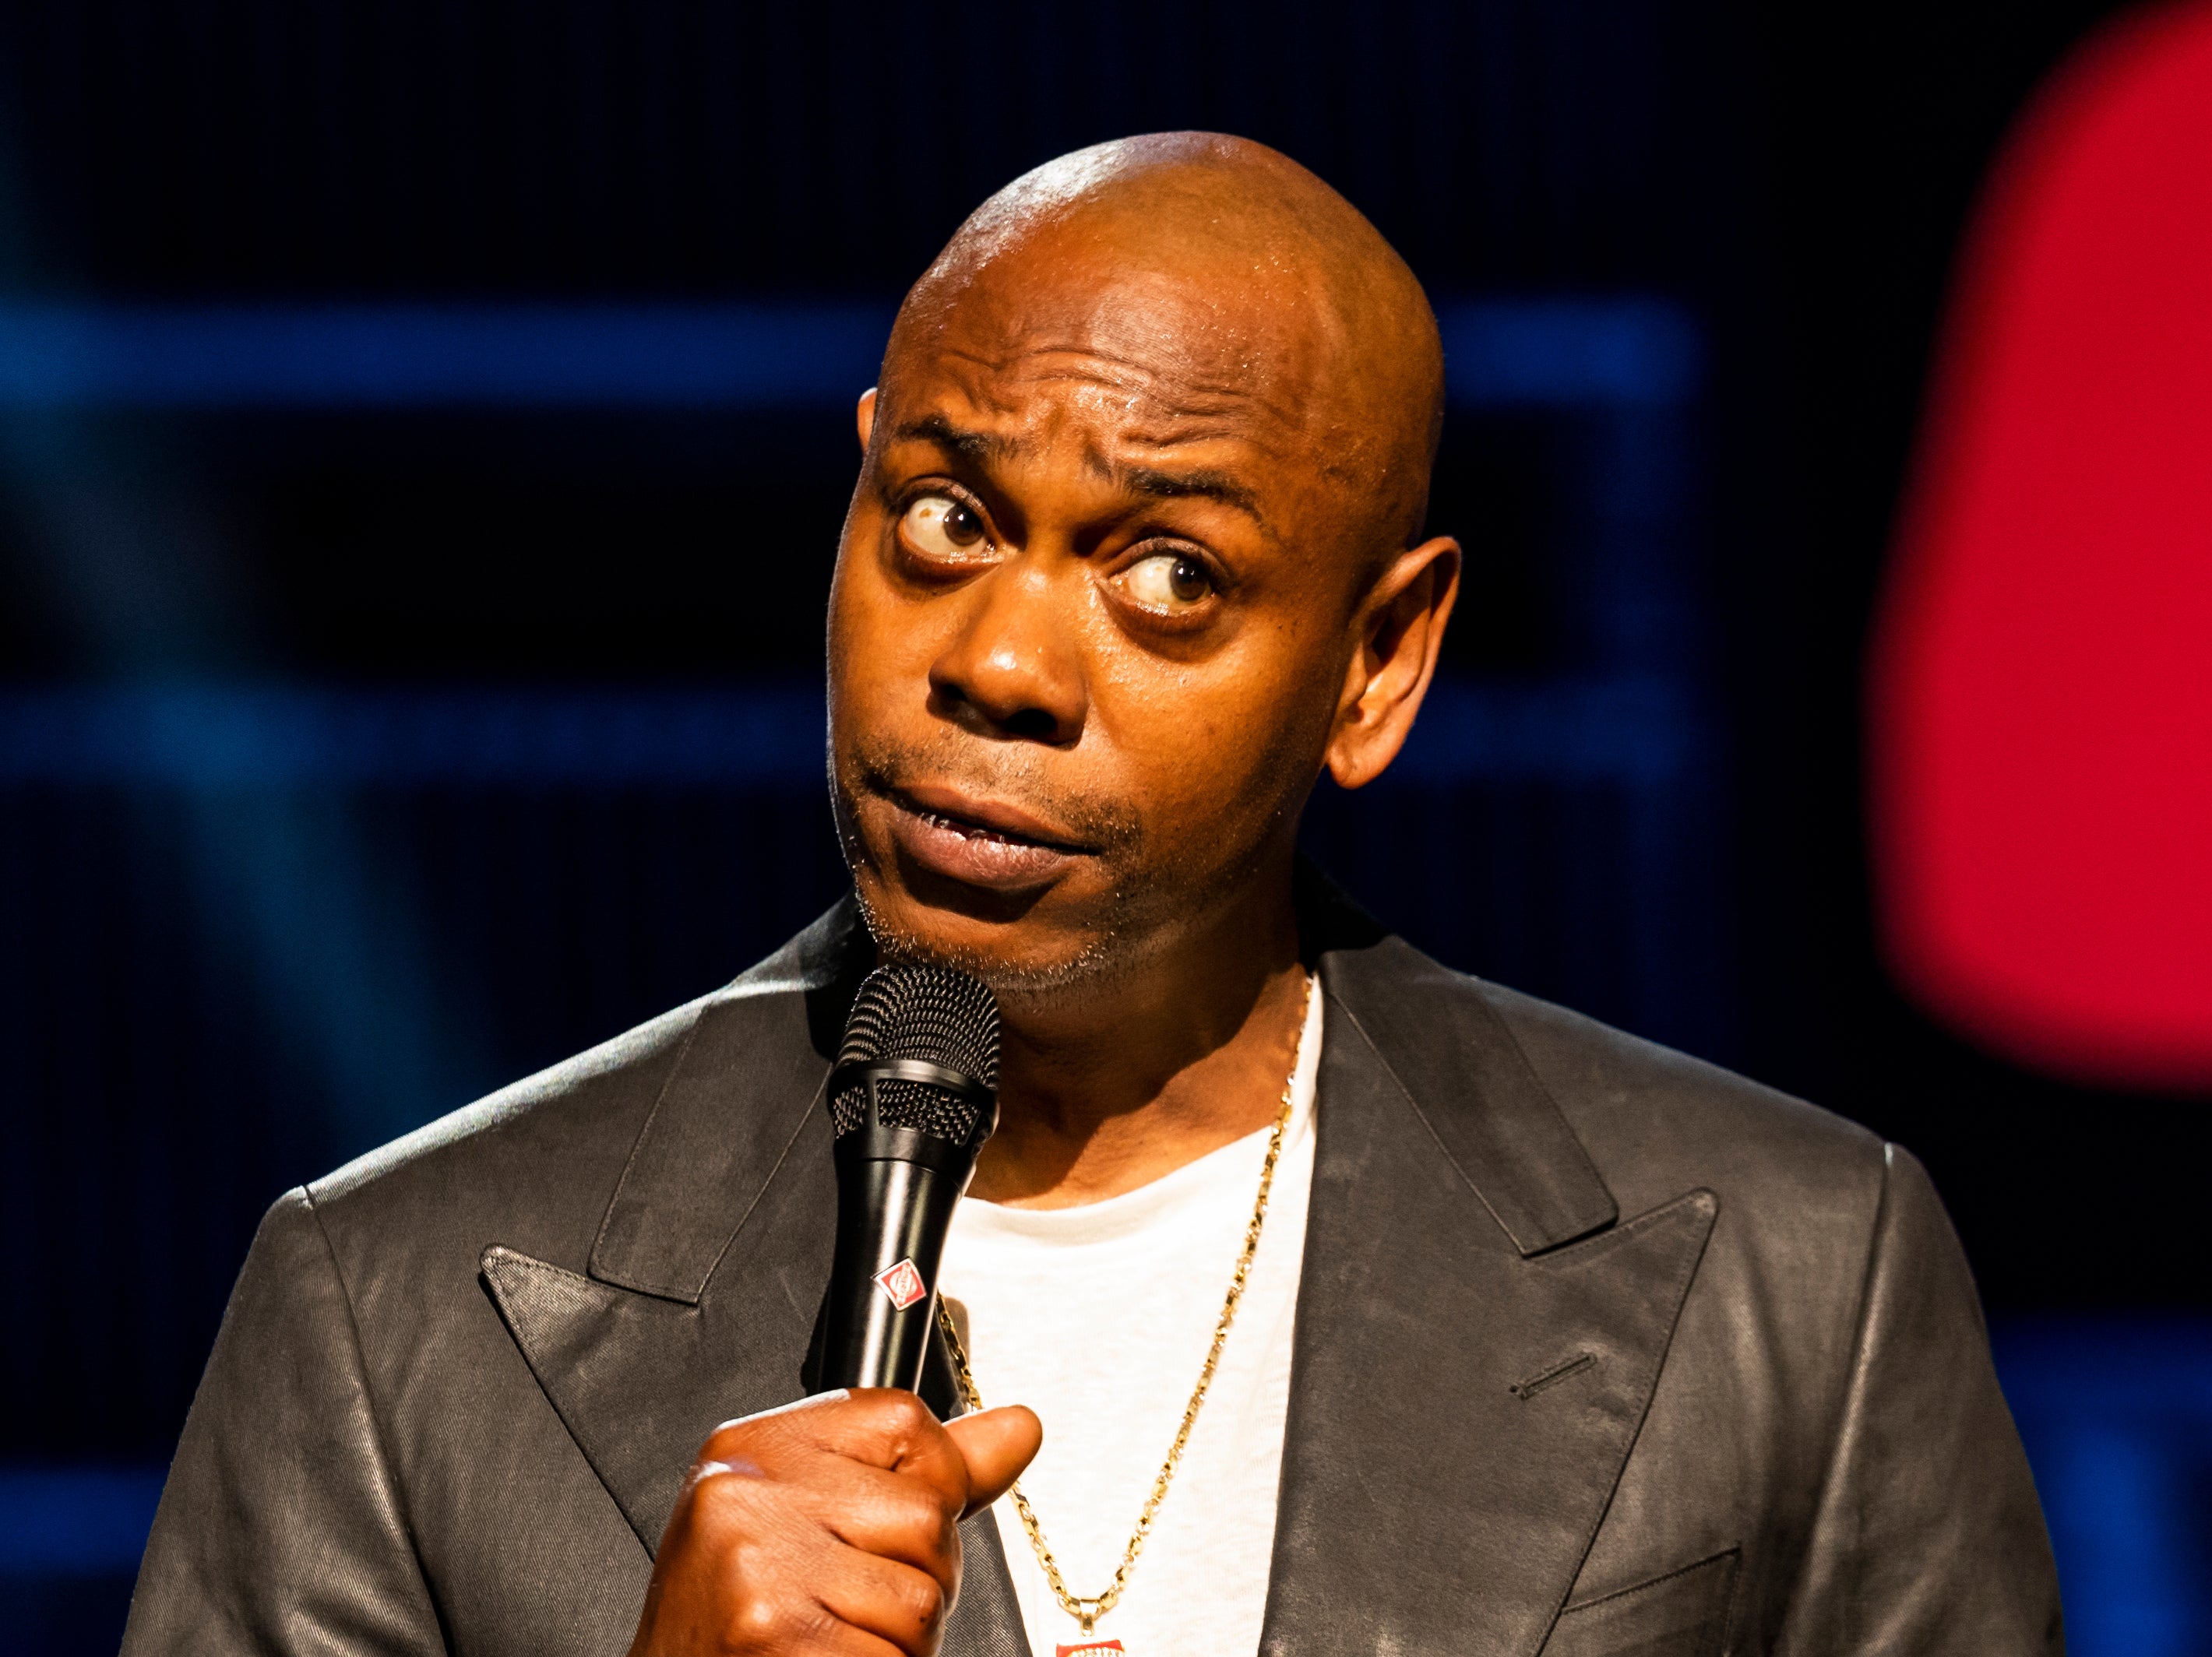 Time to sit down: Dave Chappelle’s latest stand-up special, ‘The Closer’, has provoked outrage among many Netflix viewers